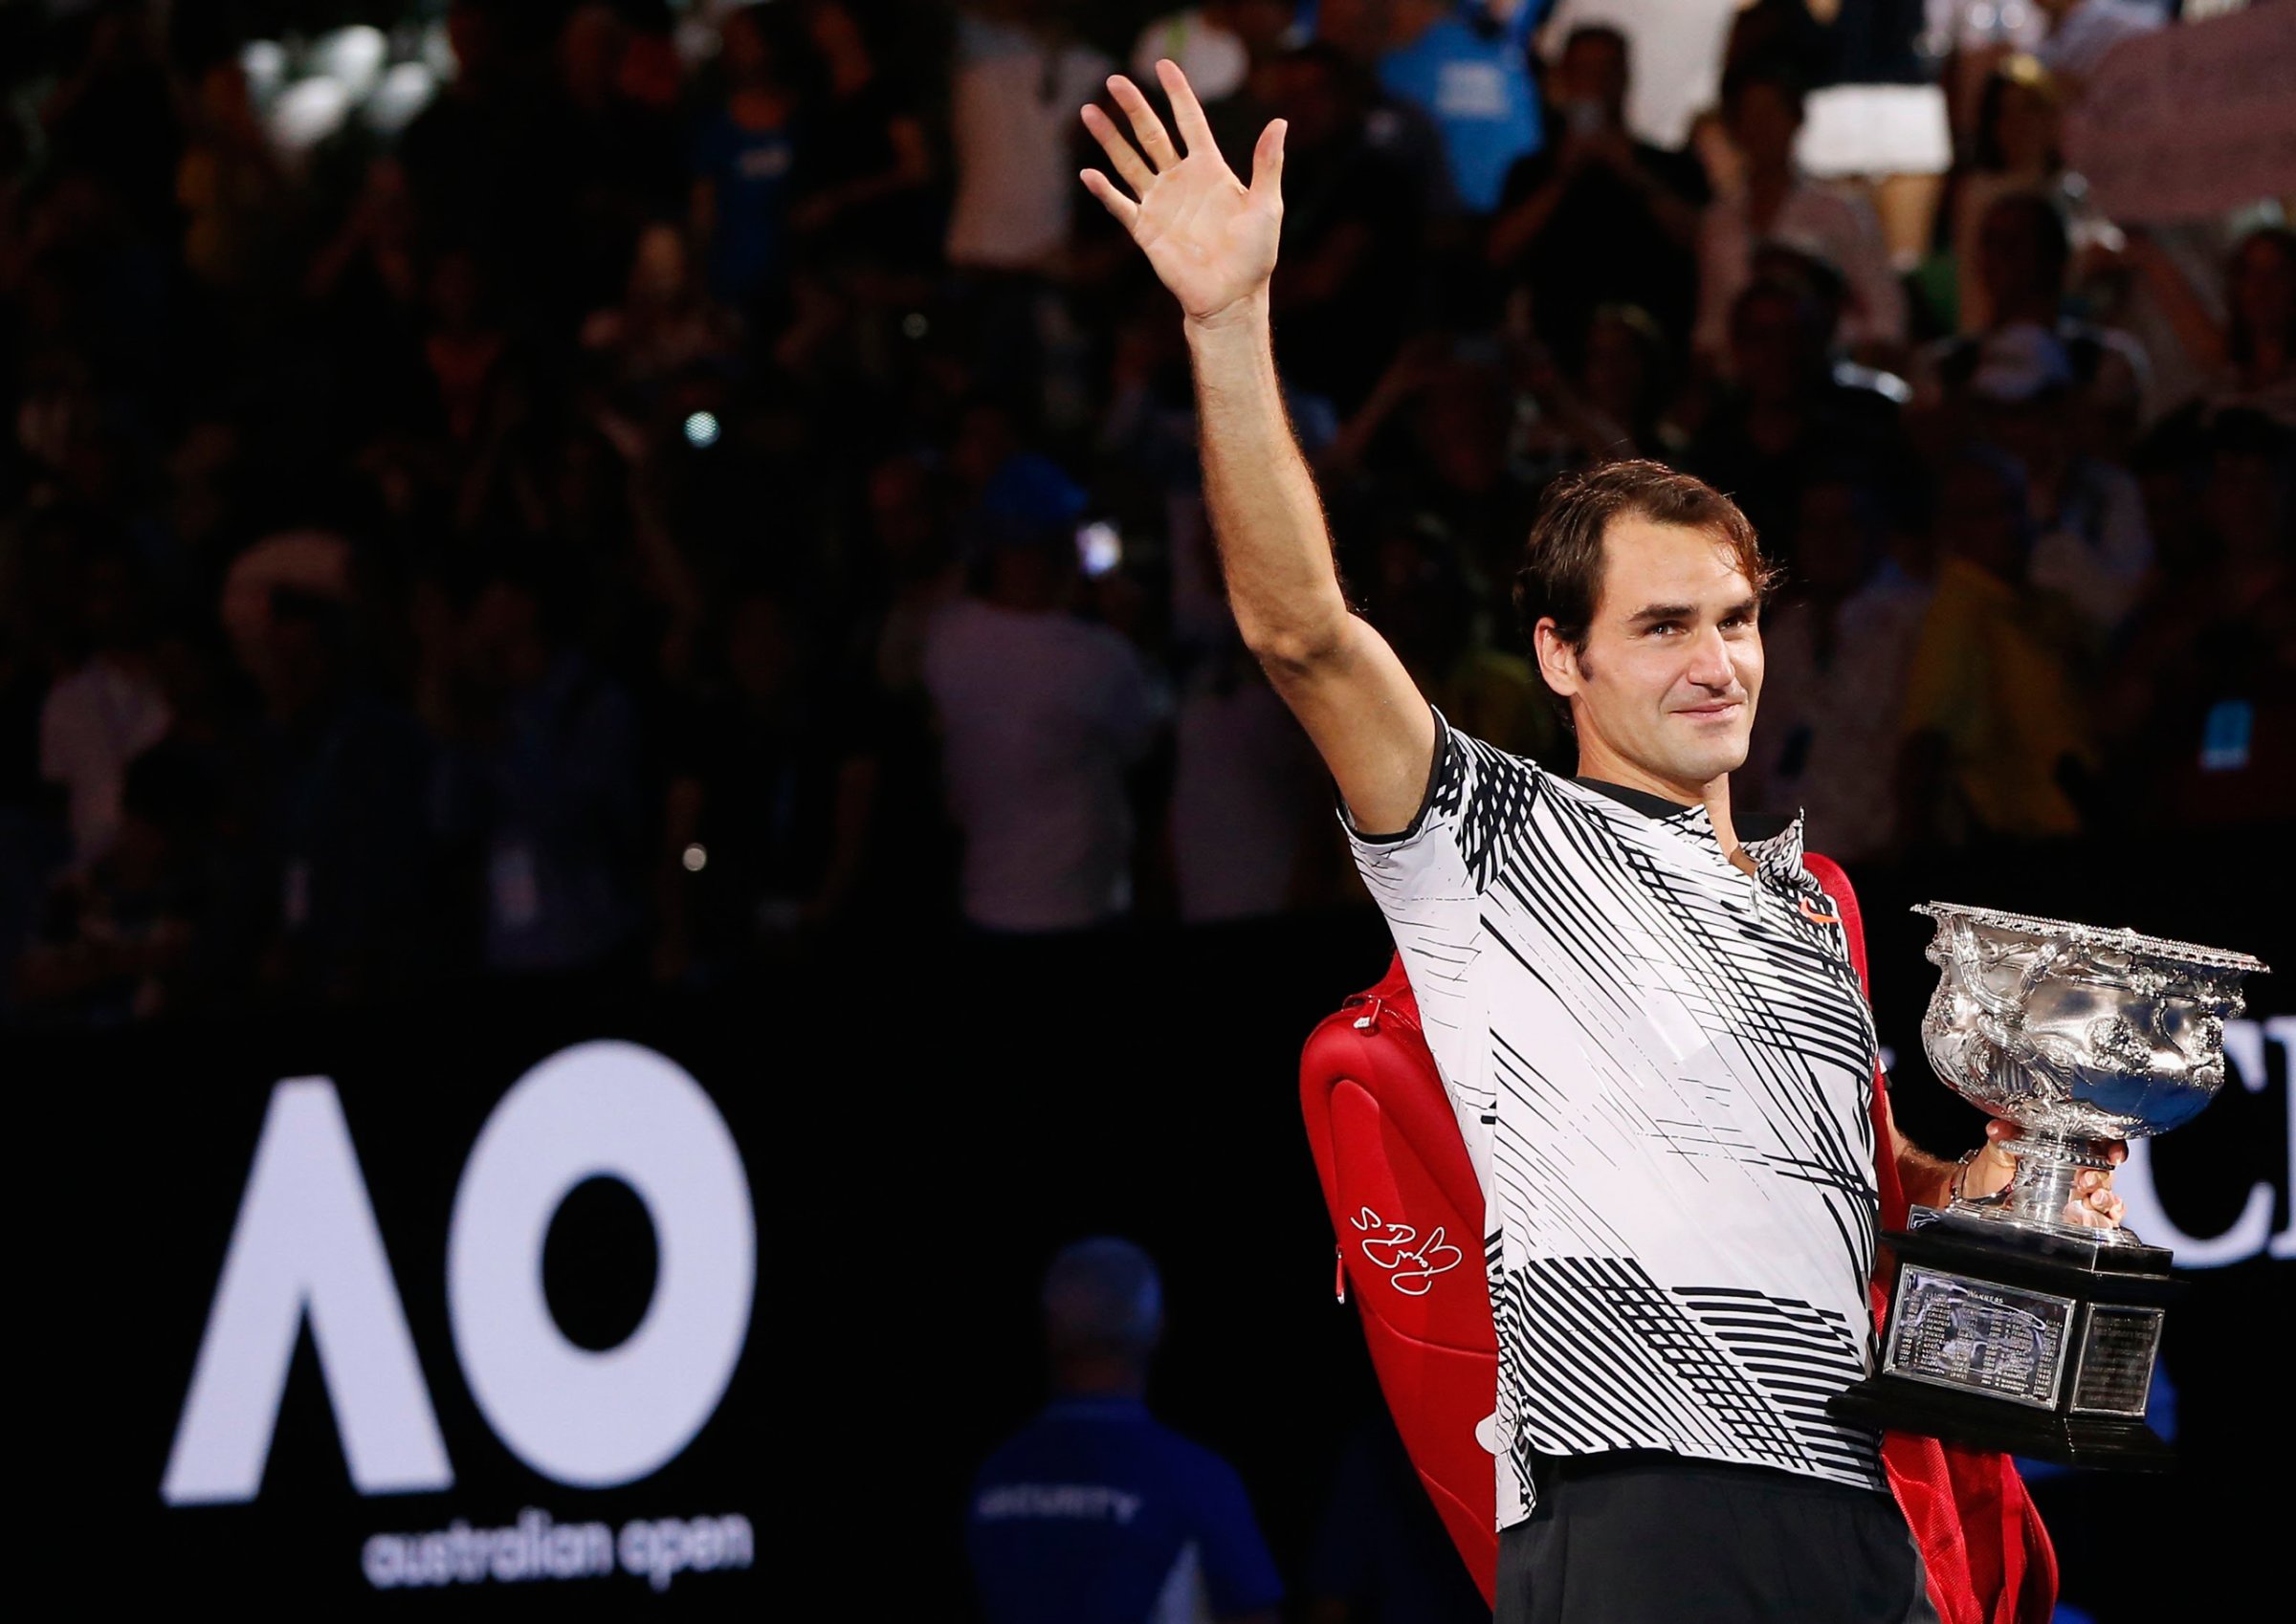 Tennis - Australian Open - Melbourne Park, Melbourne, Australia - 29/1/17 Switzerland's Roger Federer holds the trophy as he celebrates after winning his Men's singles final match against Spain's Rafael Nadal. REUTERS/Issei Kato TPX IMAGES OF THE DAY